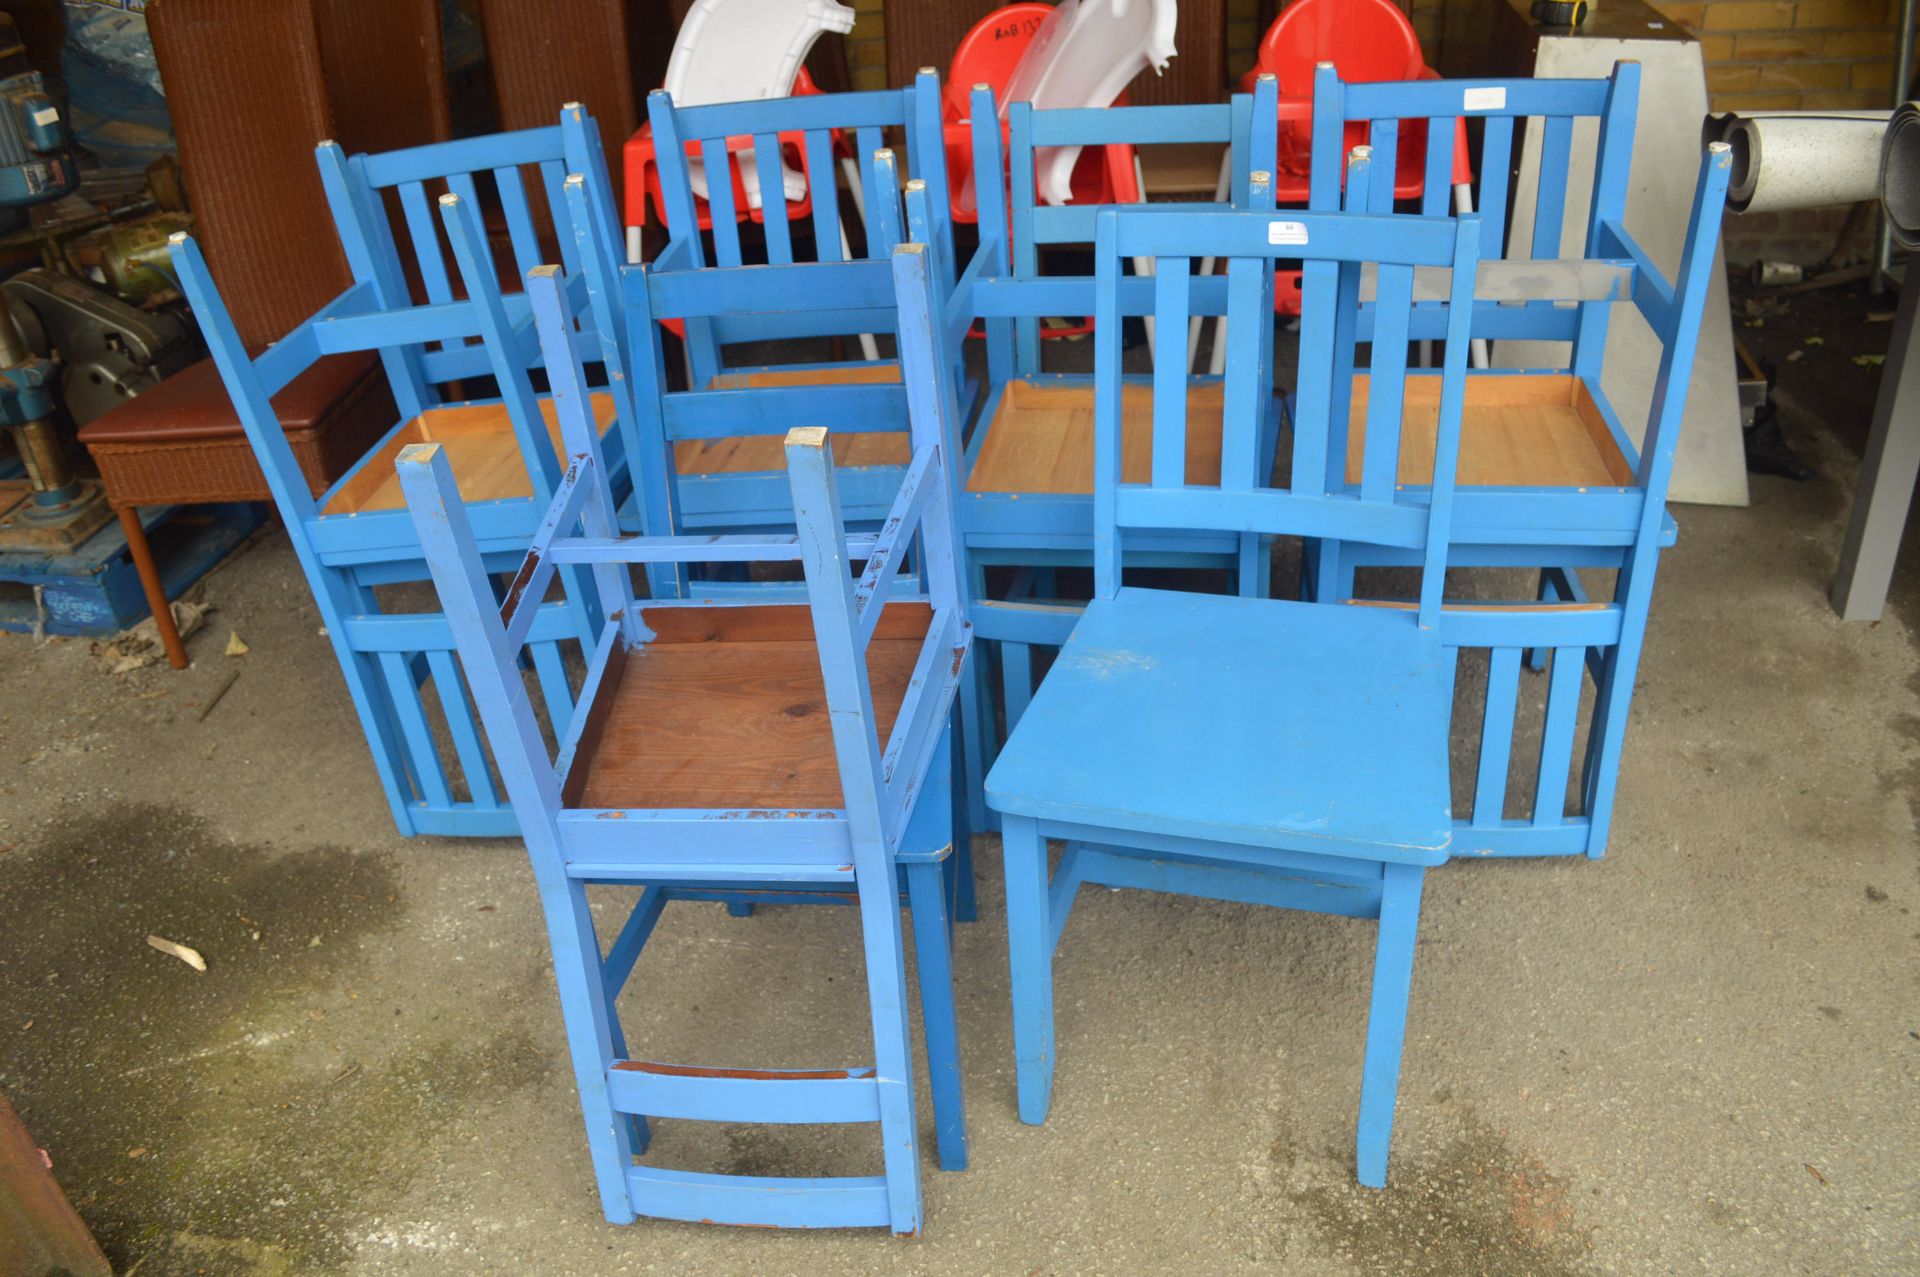 Eleven Blue Wood Chairs